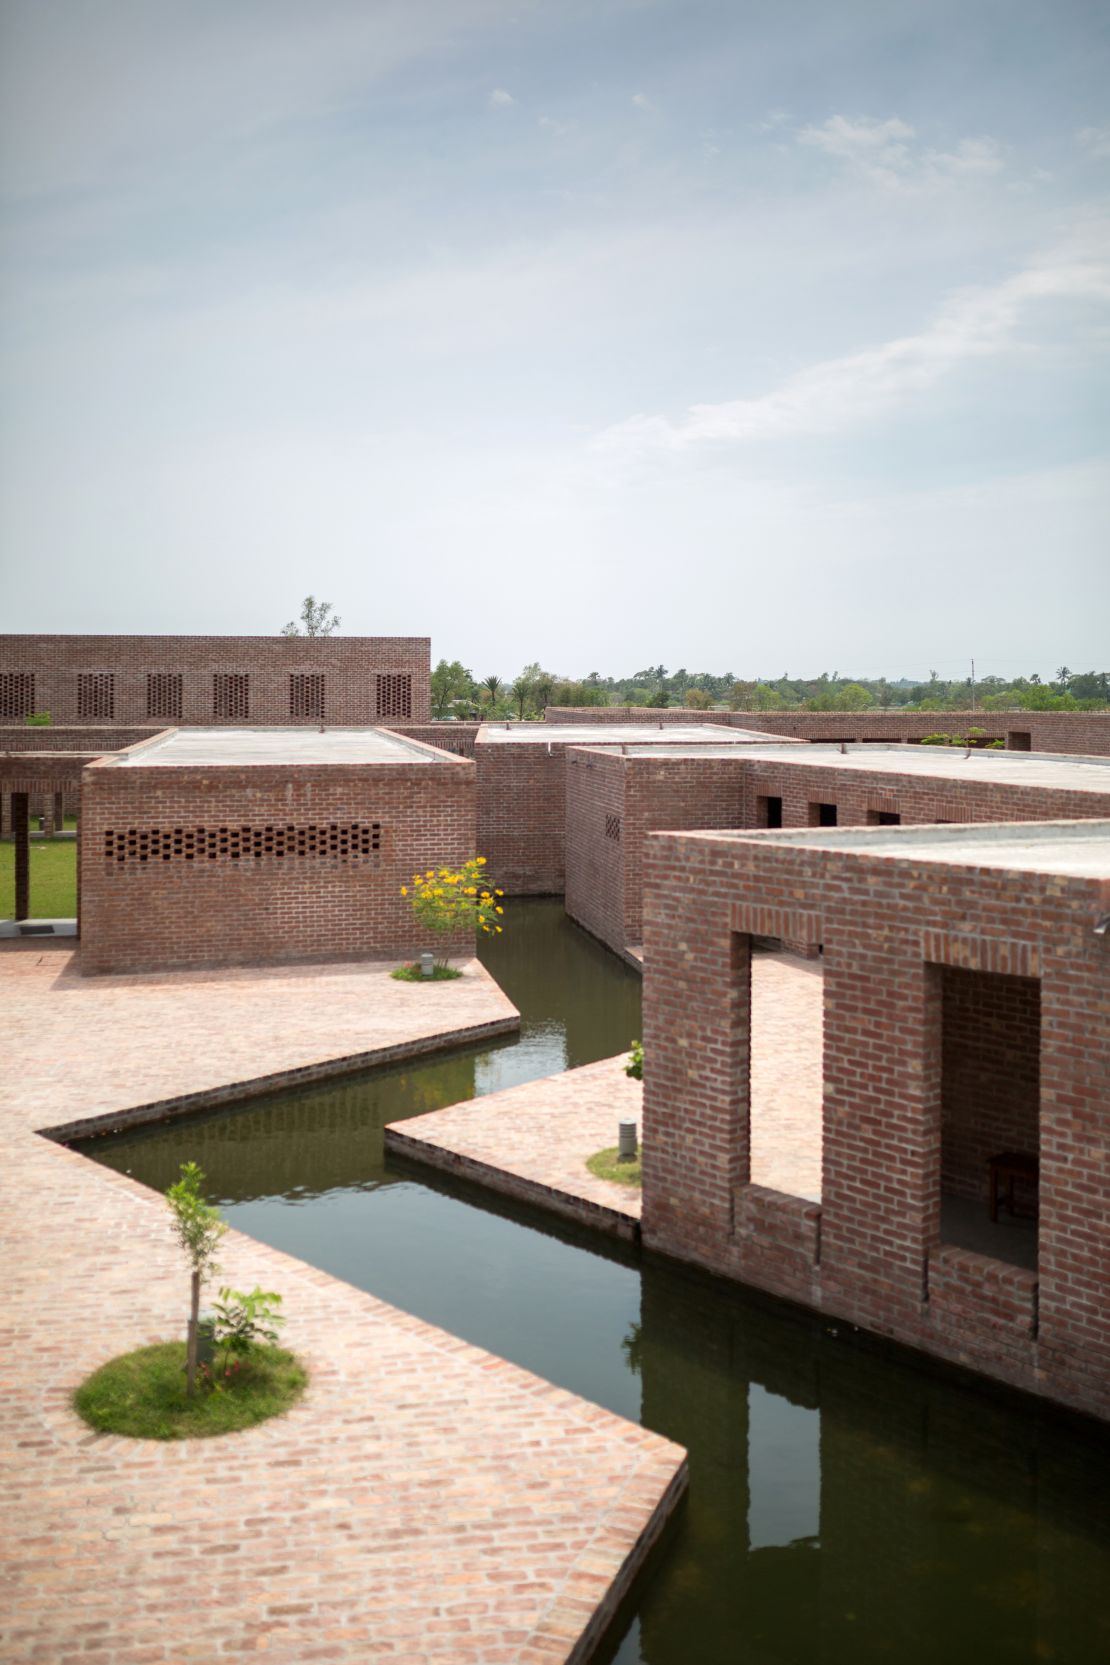 The canal cutting through the center of the complex helps with "micro climatic cooling" during hot Bangladesh summers, according to the Royal Institute of British Architects.